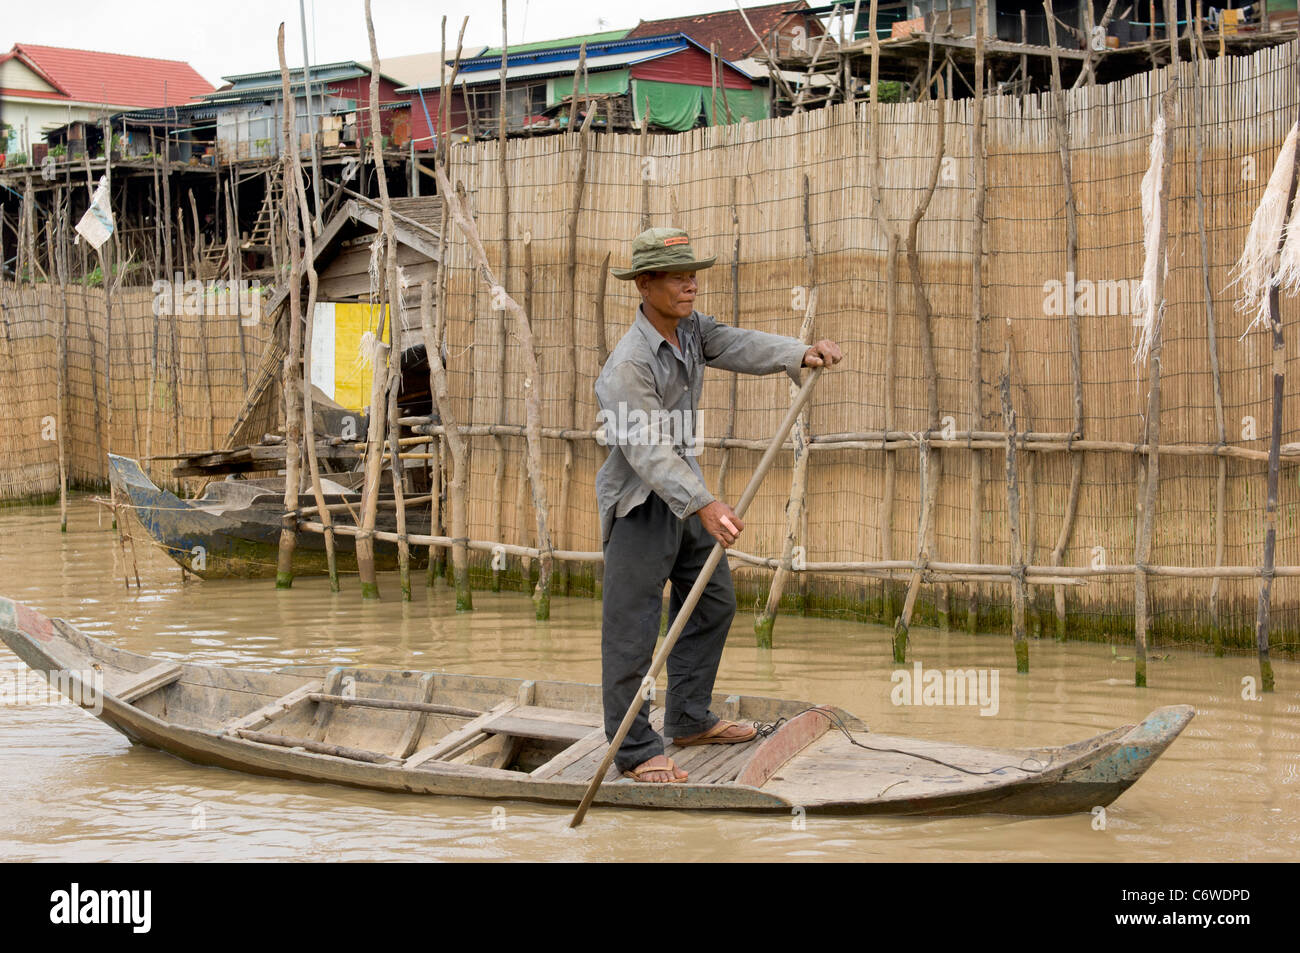 Standing man poling a boat in a tributary of Tonle Sap lake, at Kompong Klang village near Siem Reap, Cambodia Stock Photo